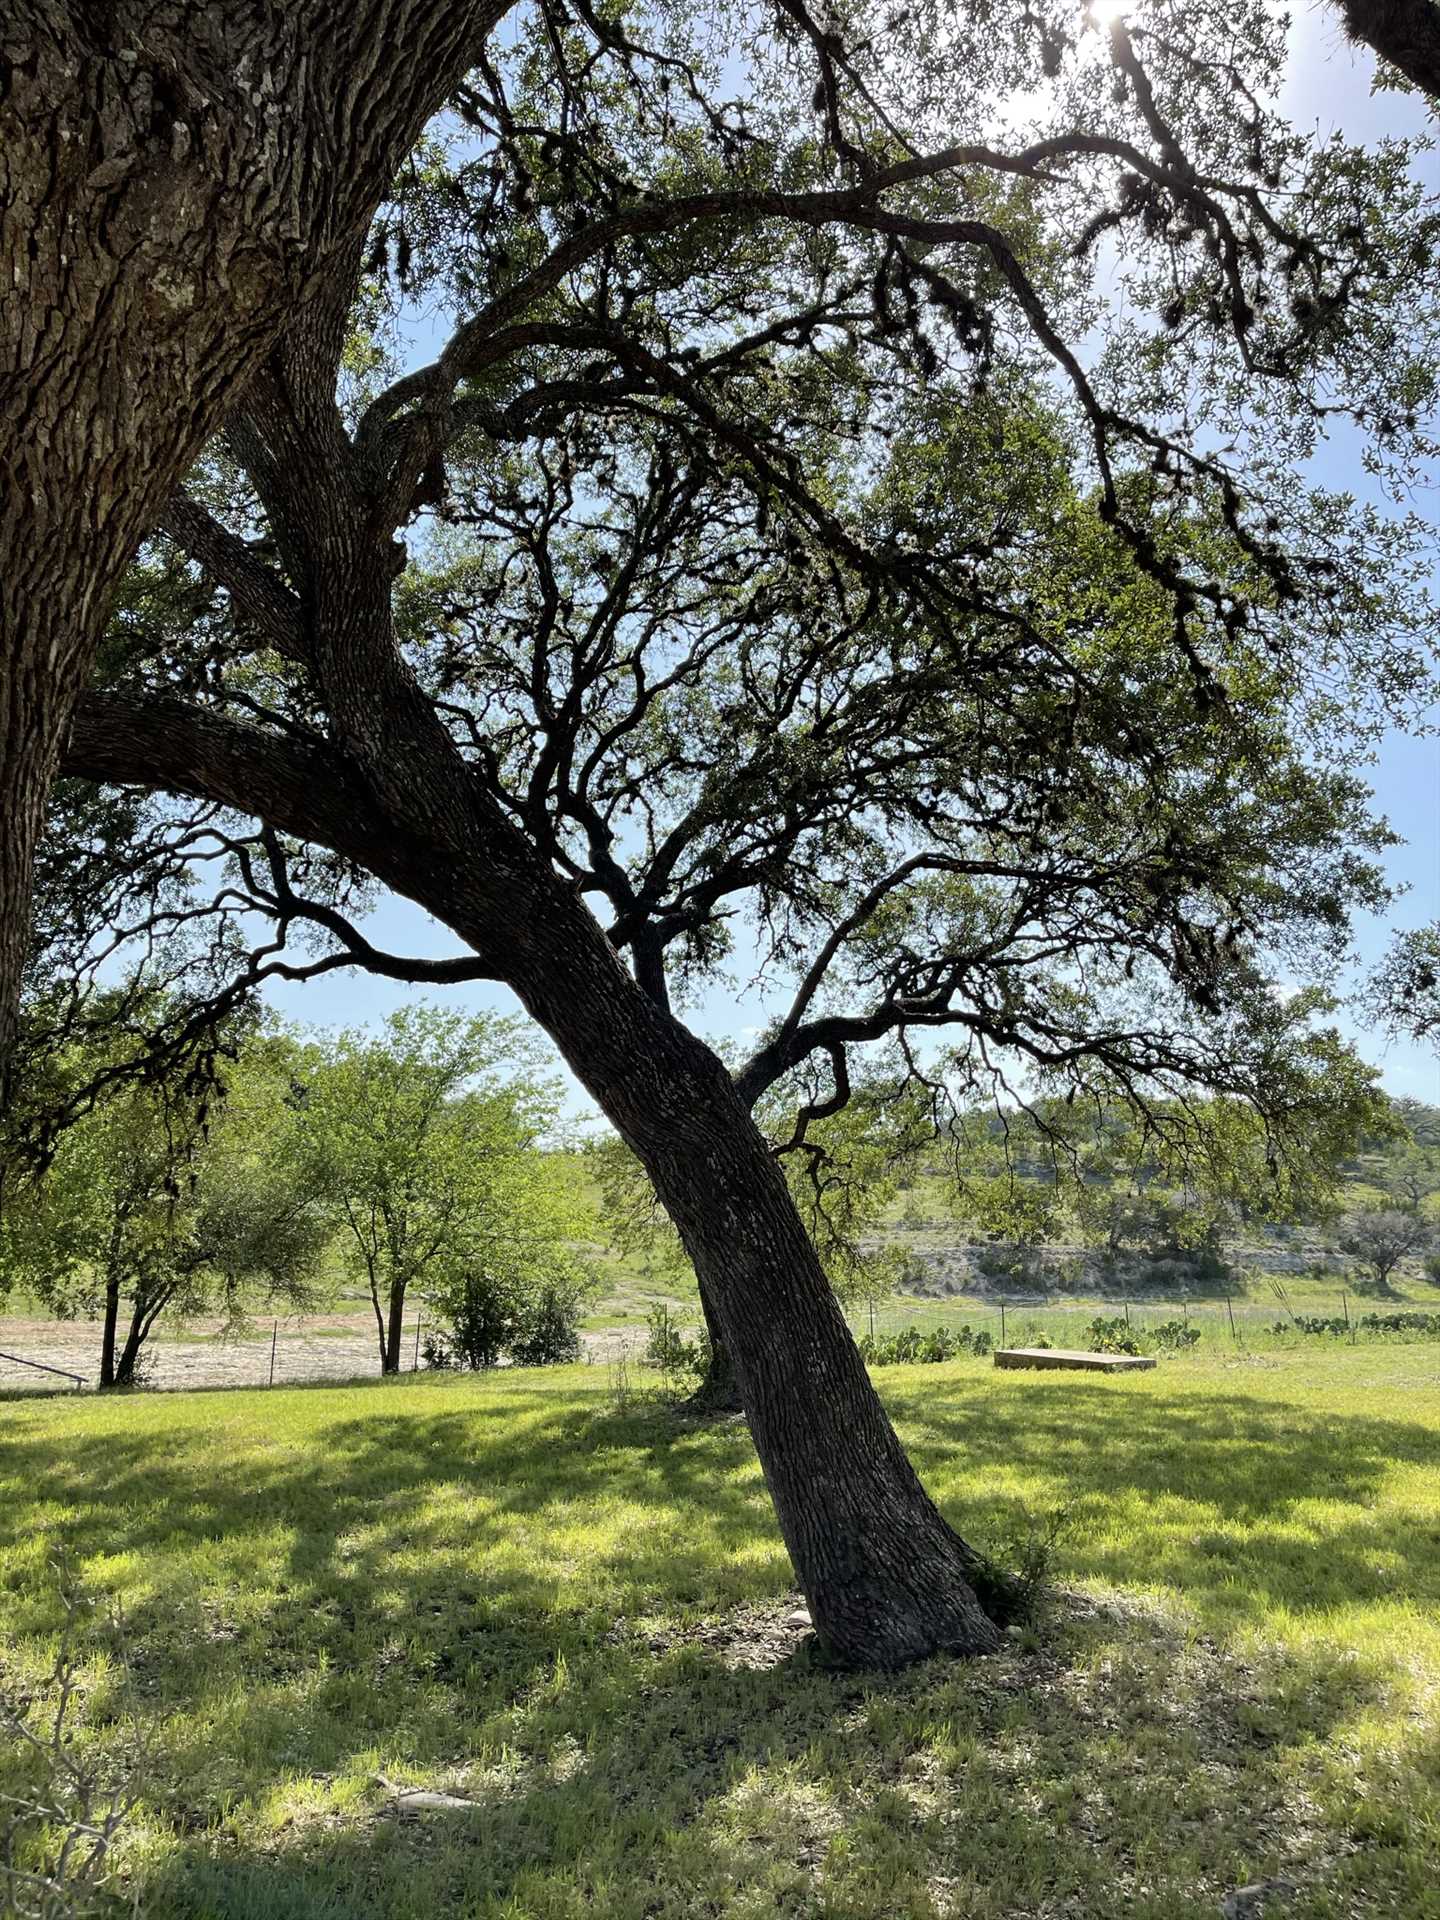                                                 If you'd like to see more of our gorgeous Texas Hill Country, there are plenty of winding roads in the vicinity, on which you can take a scenic tour!